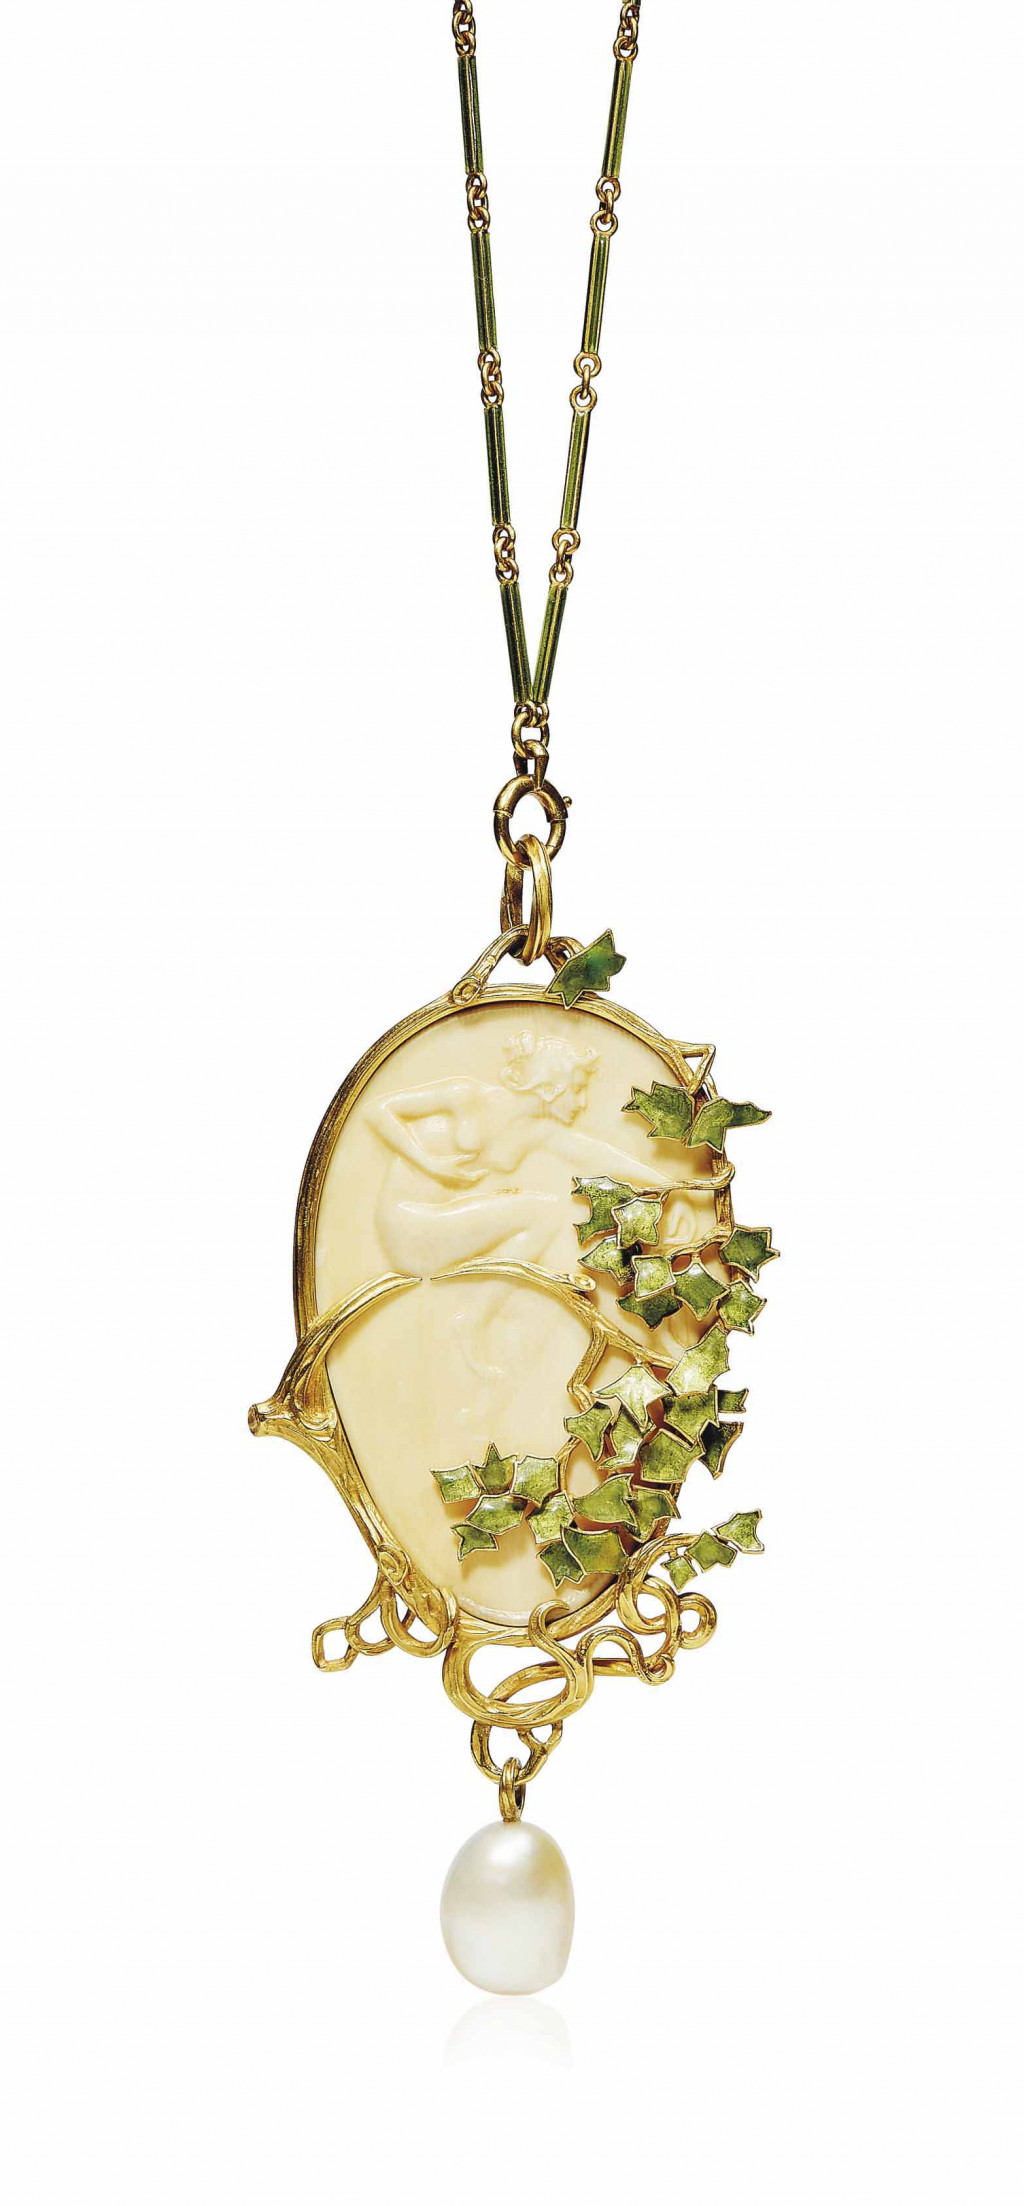 AN ART NOUVEAU GALALITH, ENAMEL AND PEARL PENDENT NECKLACE, BY REN? LALIQUE.jpg